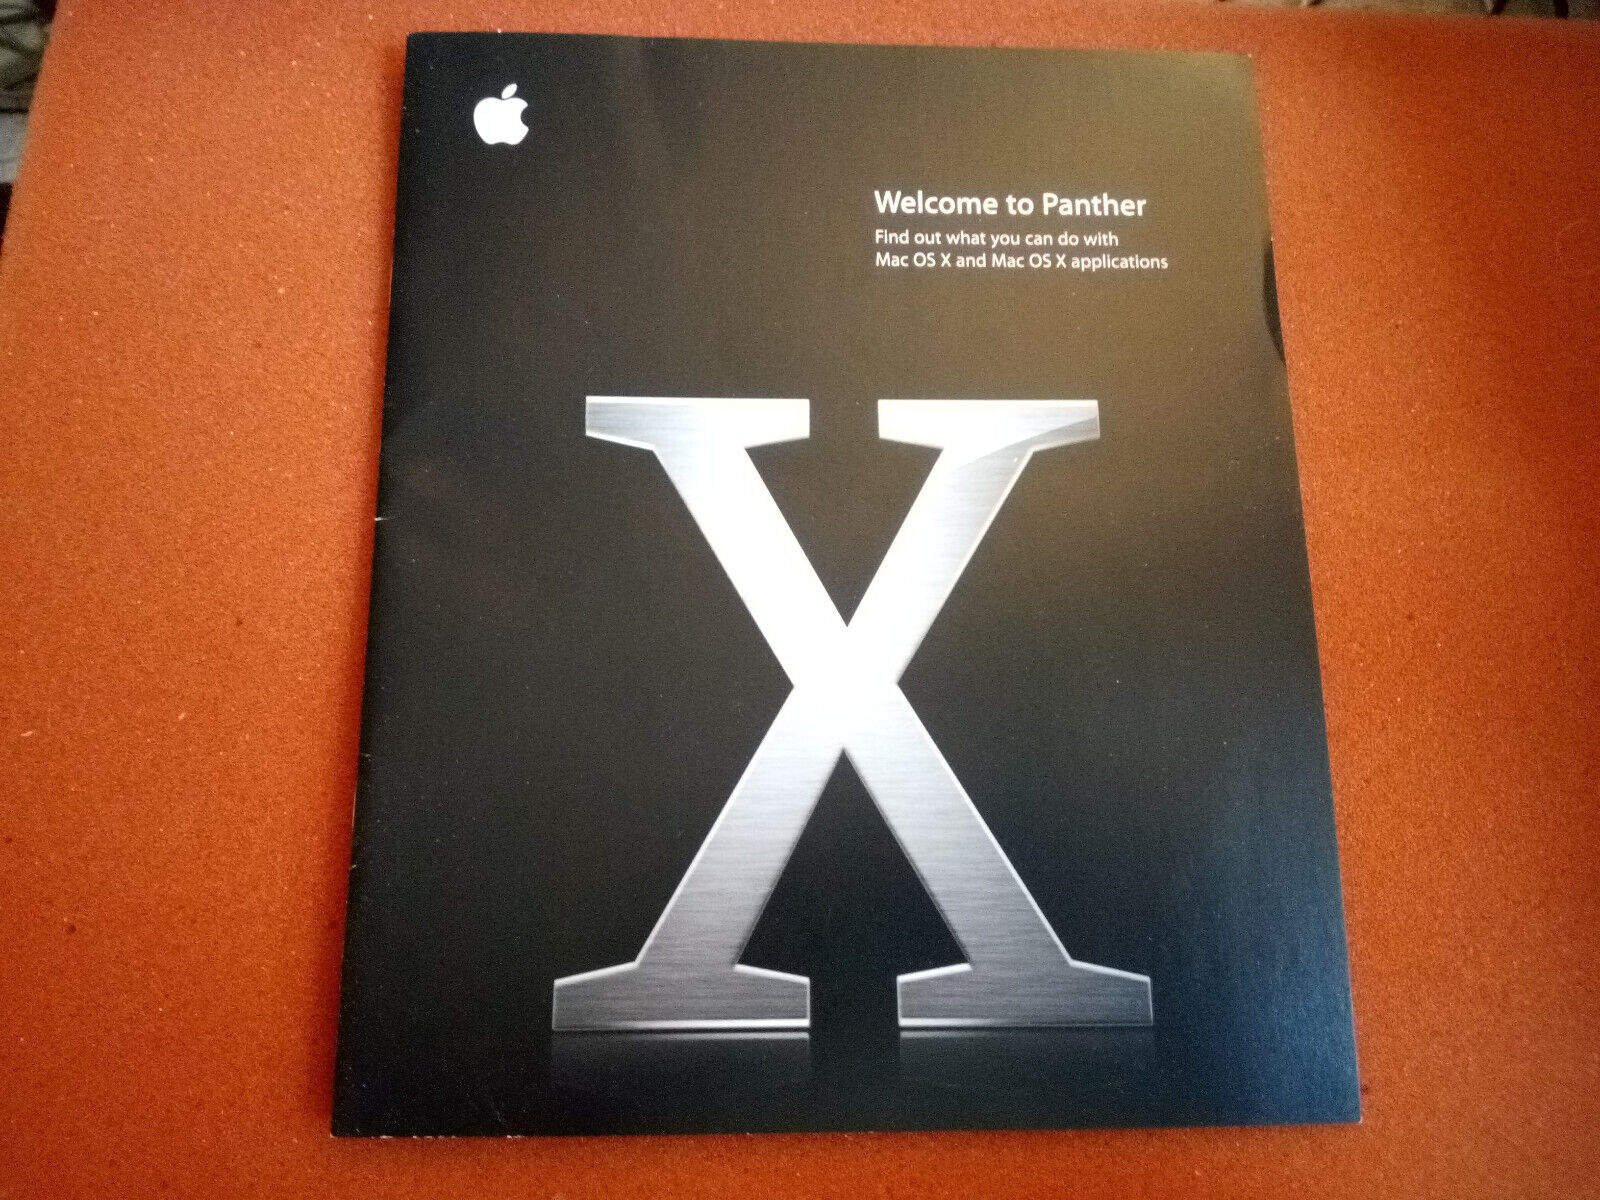 Apple 2004 WELCOME TO PANTHER Mac OSX 10.3 Brochure 034-2544-A